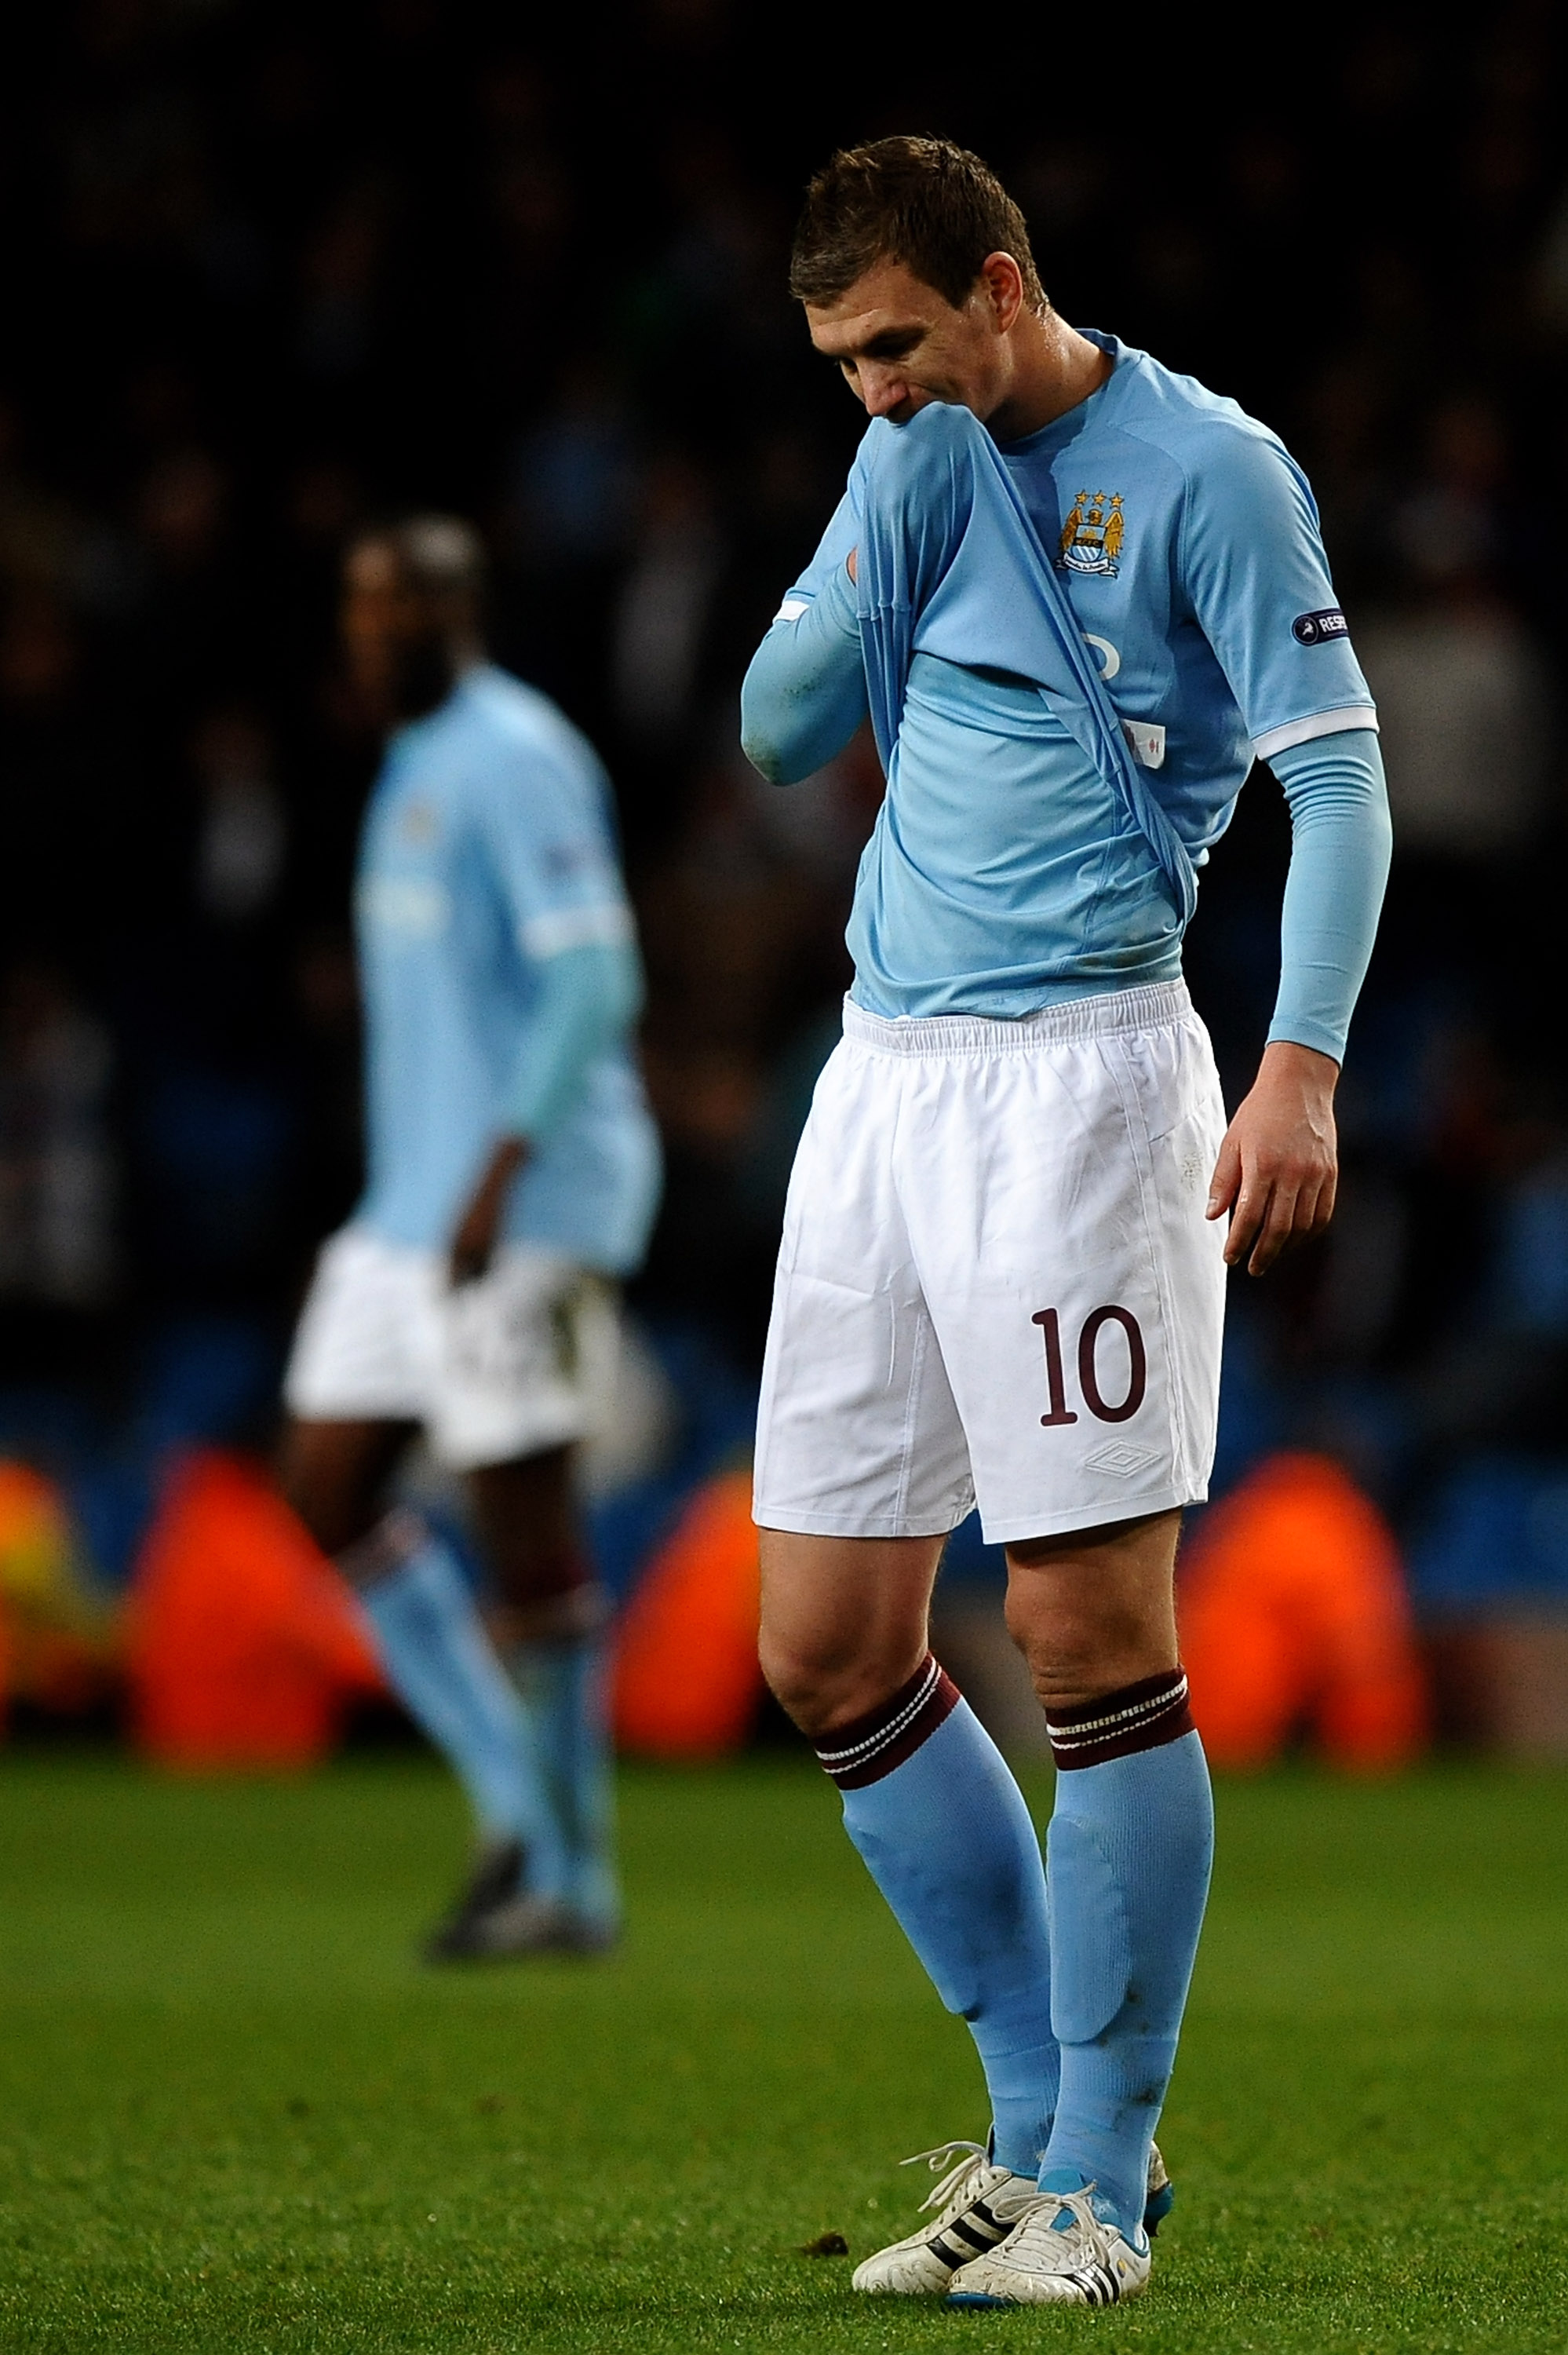 MANCHESTER, ENGLAND - MARCH 17: Edin Dzeko of Manchester City shows his dejection during the UEFA Europa League round of 16 second leg match between Manchester City and Dynamo Kiev at City of Manchester Stadium on March 17, 2011 in Manchester, England.  (